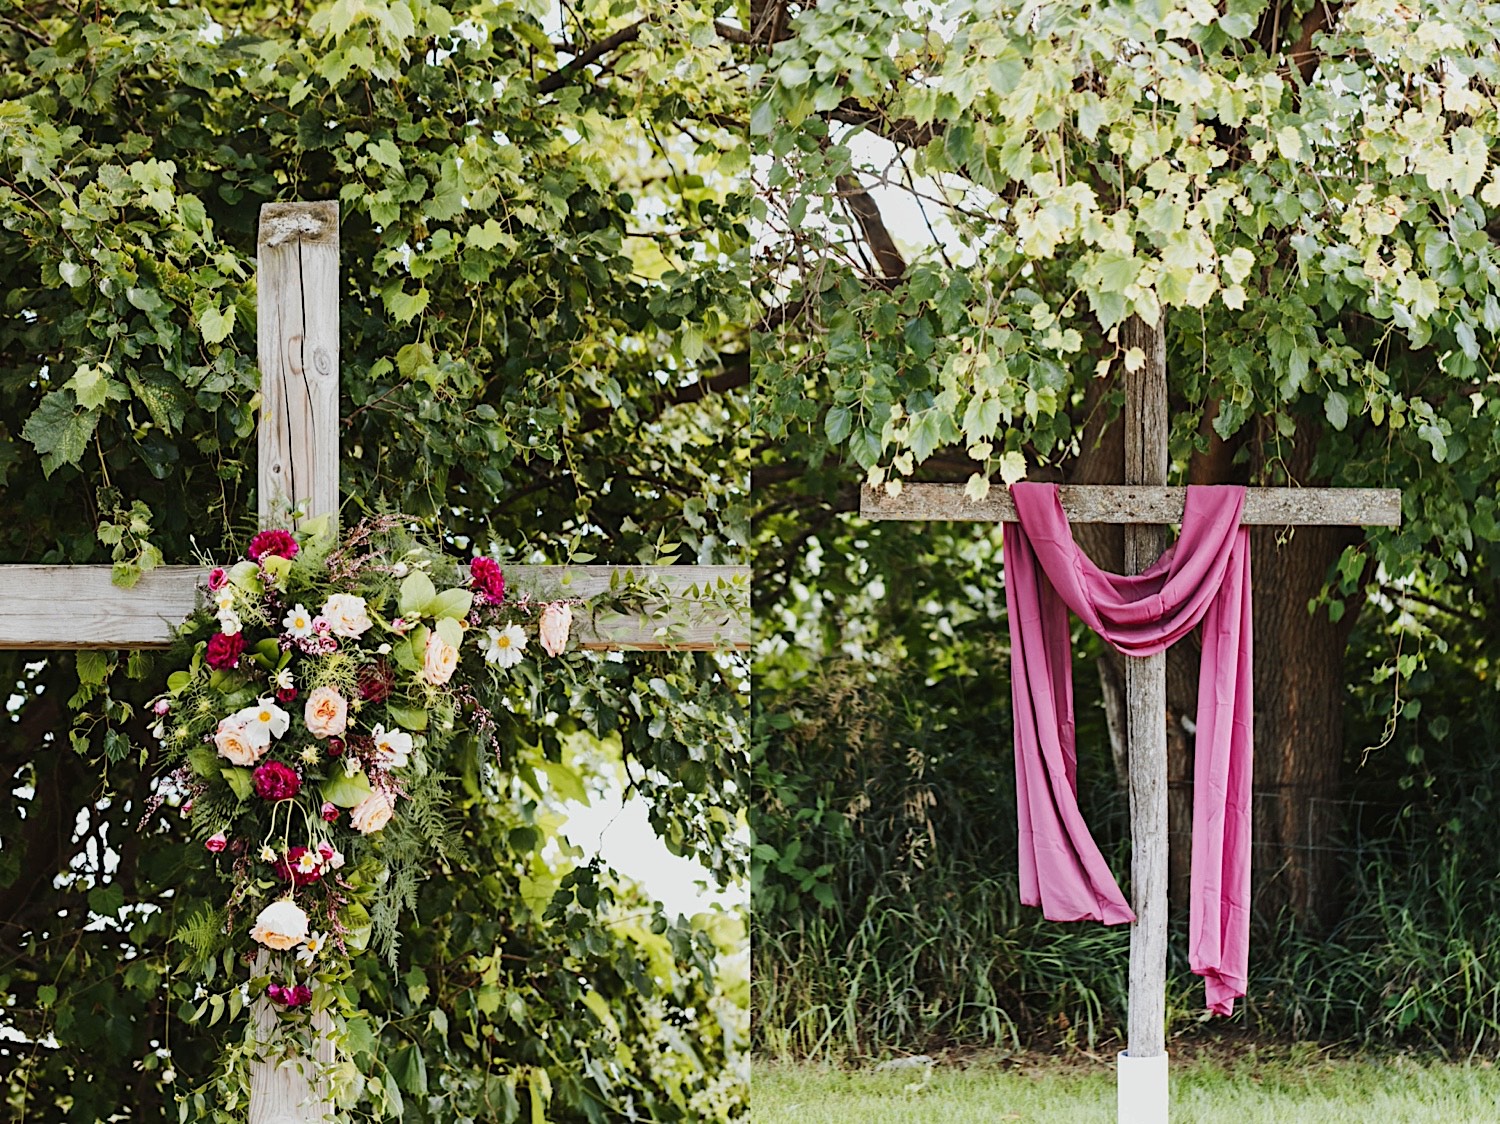 2 photos side by side, the left is a wooden cross with flowers on it, the right is a wooden cross with pink/red fabric draped across it